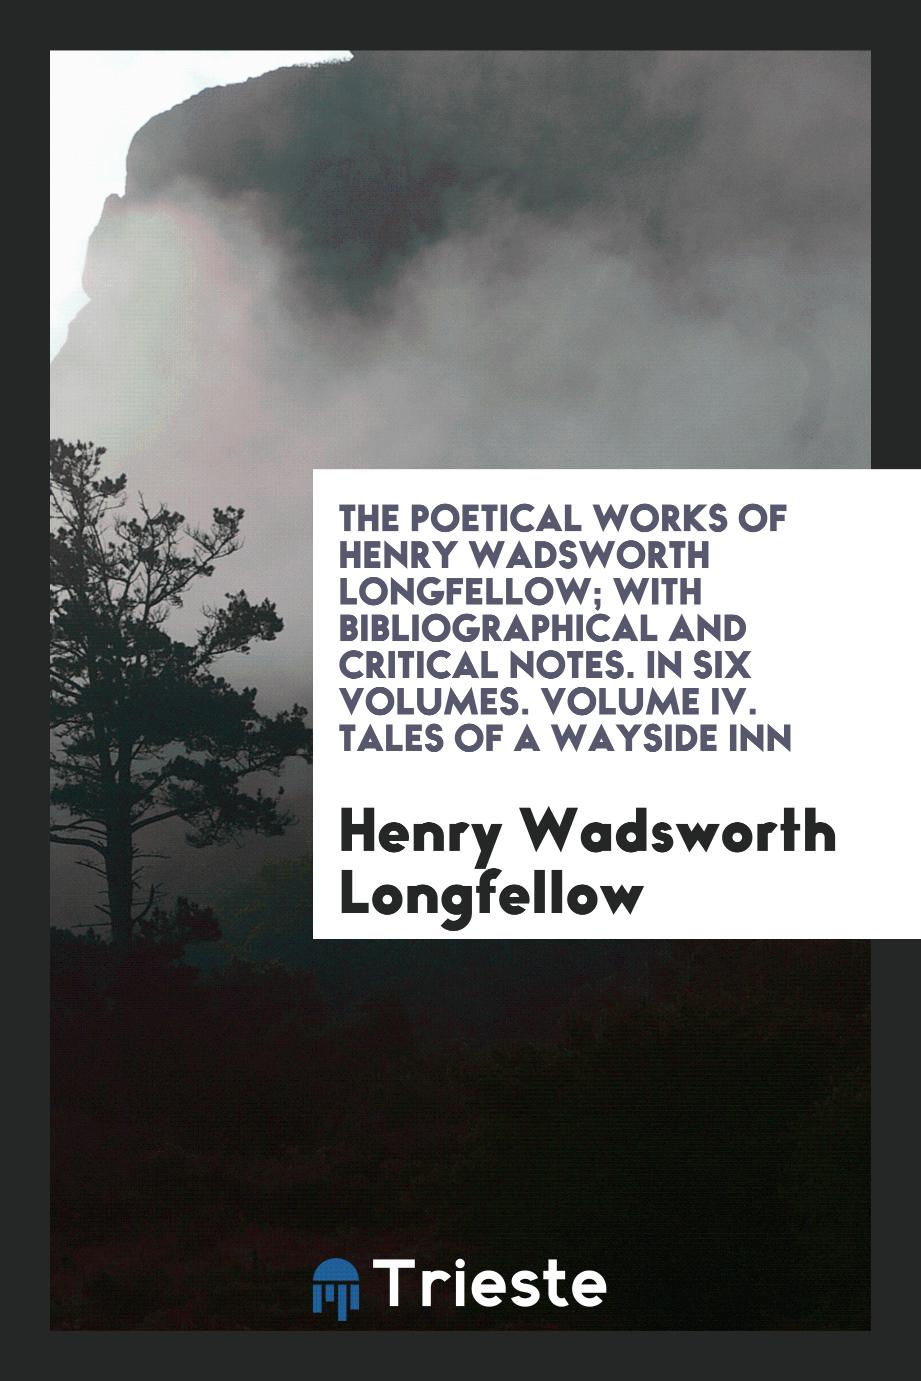 The poetical works of Henry Wadsworth Longfellow; with bibliographical and critical notes. In Six Volumes. Volume IV. Tales of a wayside inn